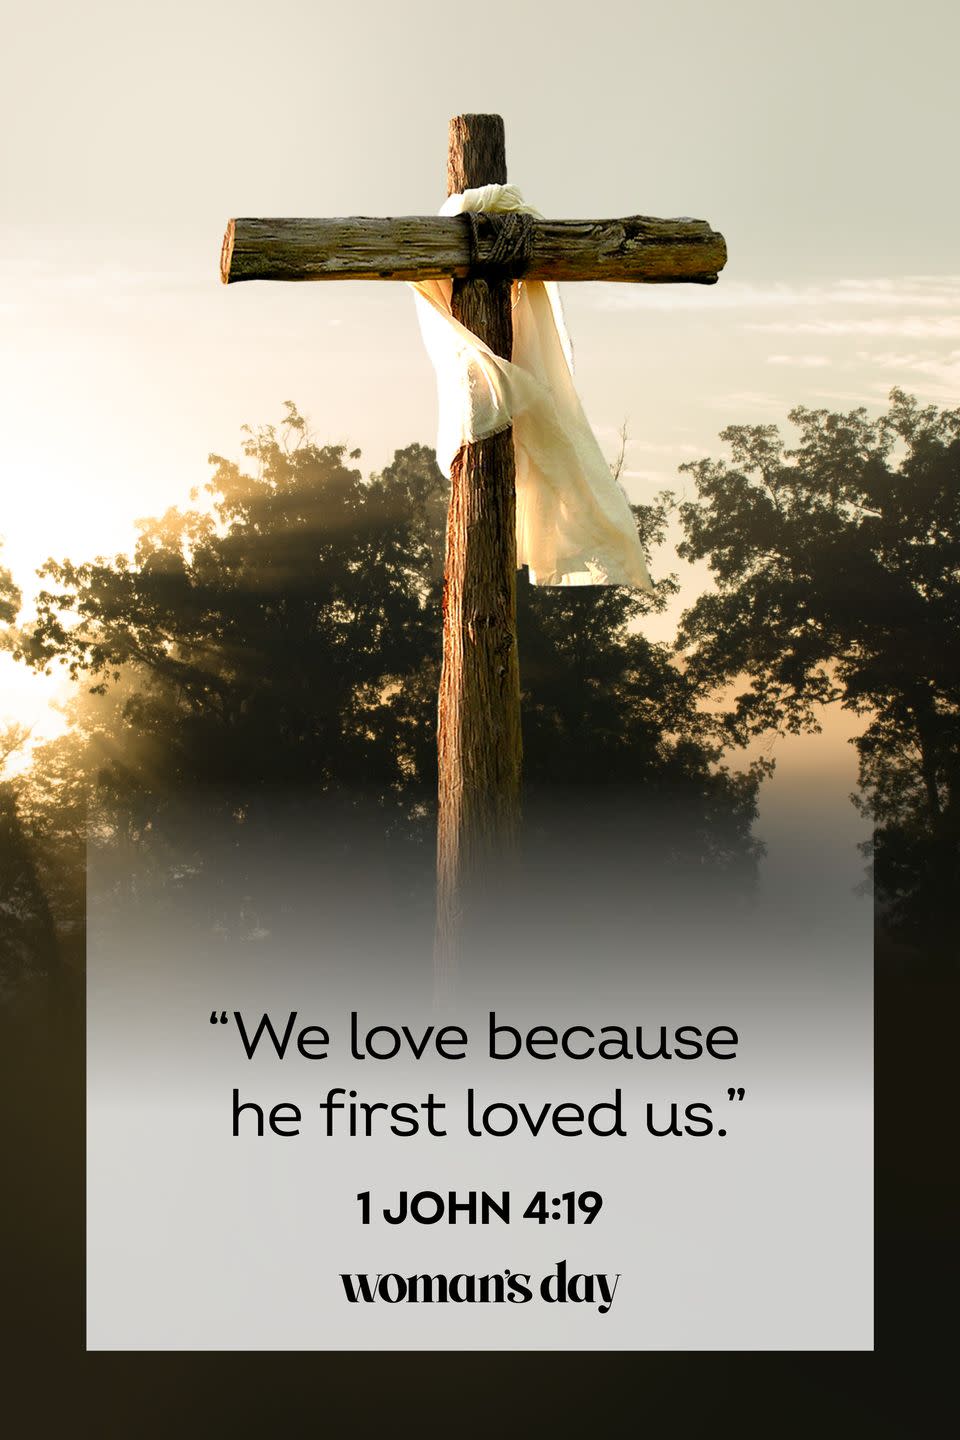 <p>"We love because he first loved us."</p>